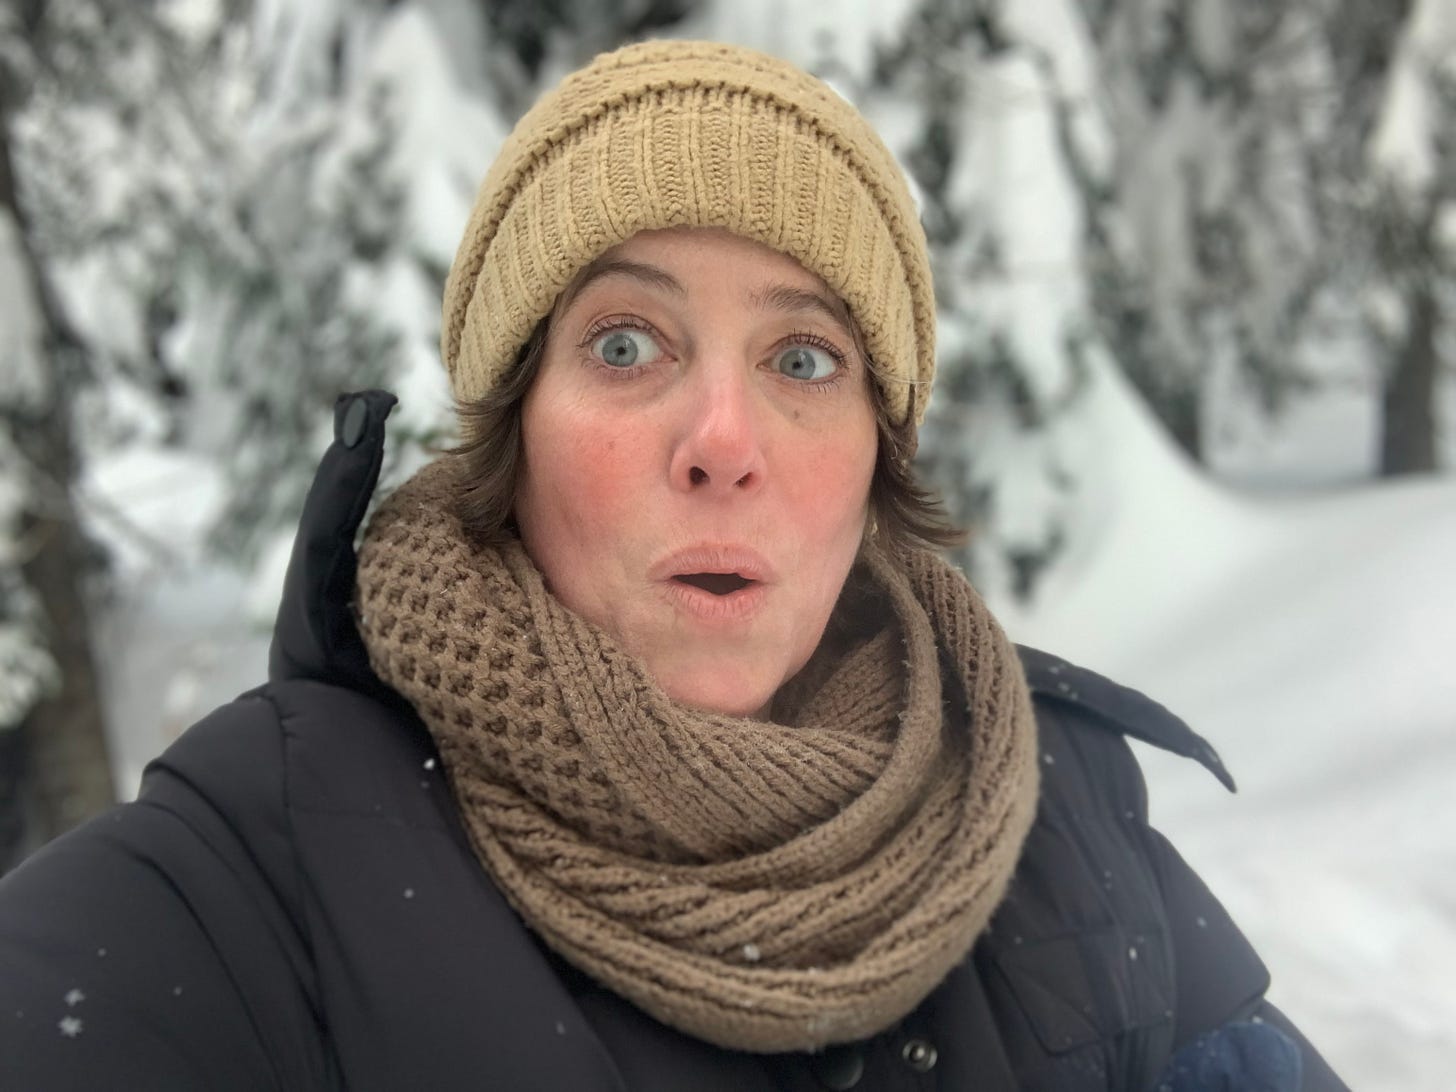 A woman, author Holly Starley, takes a selfie while playing in the snow